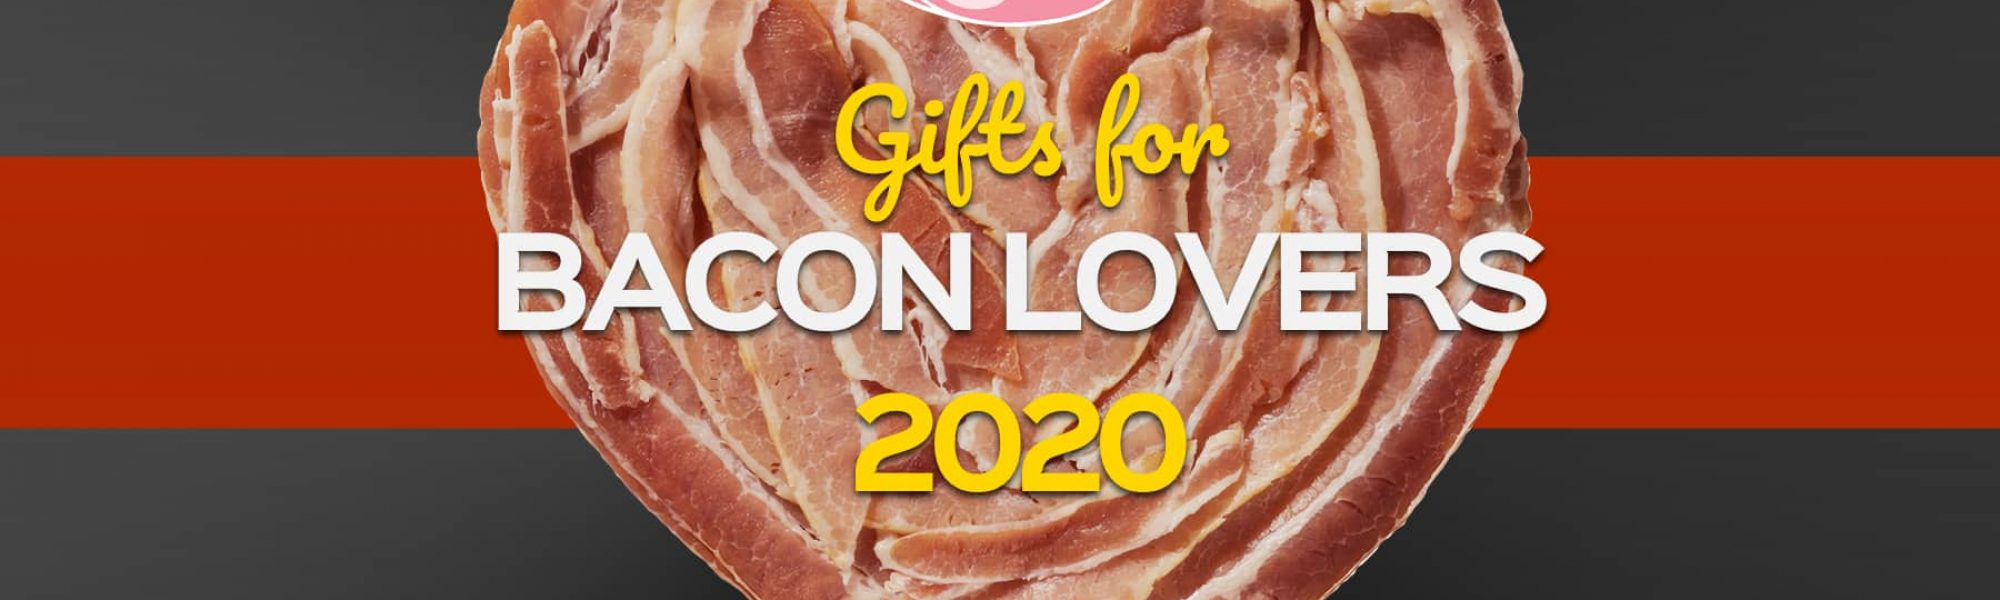 gifts-bacon-lovers-2020